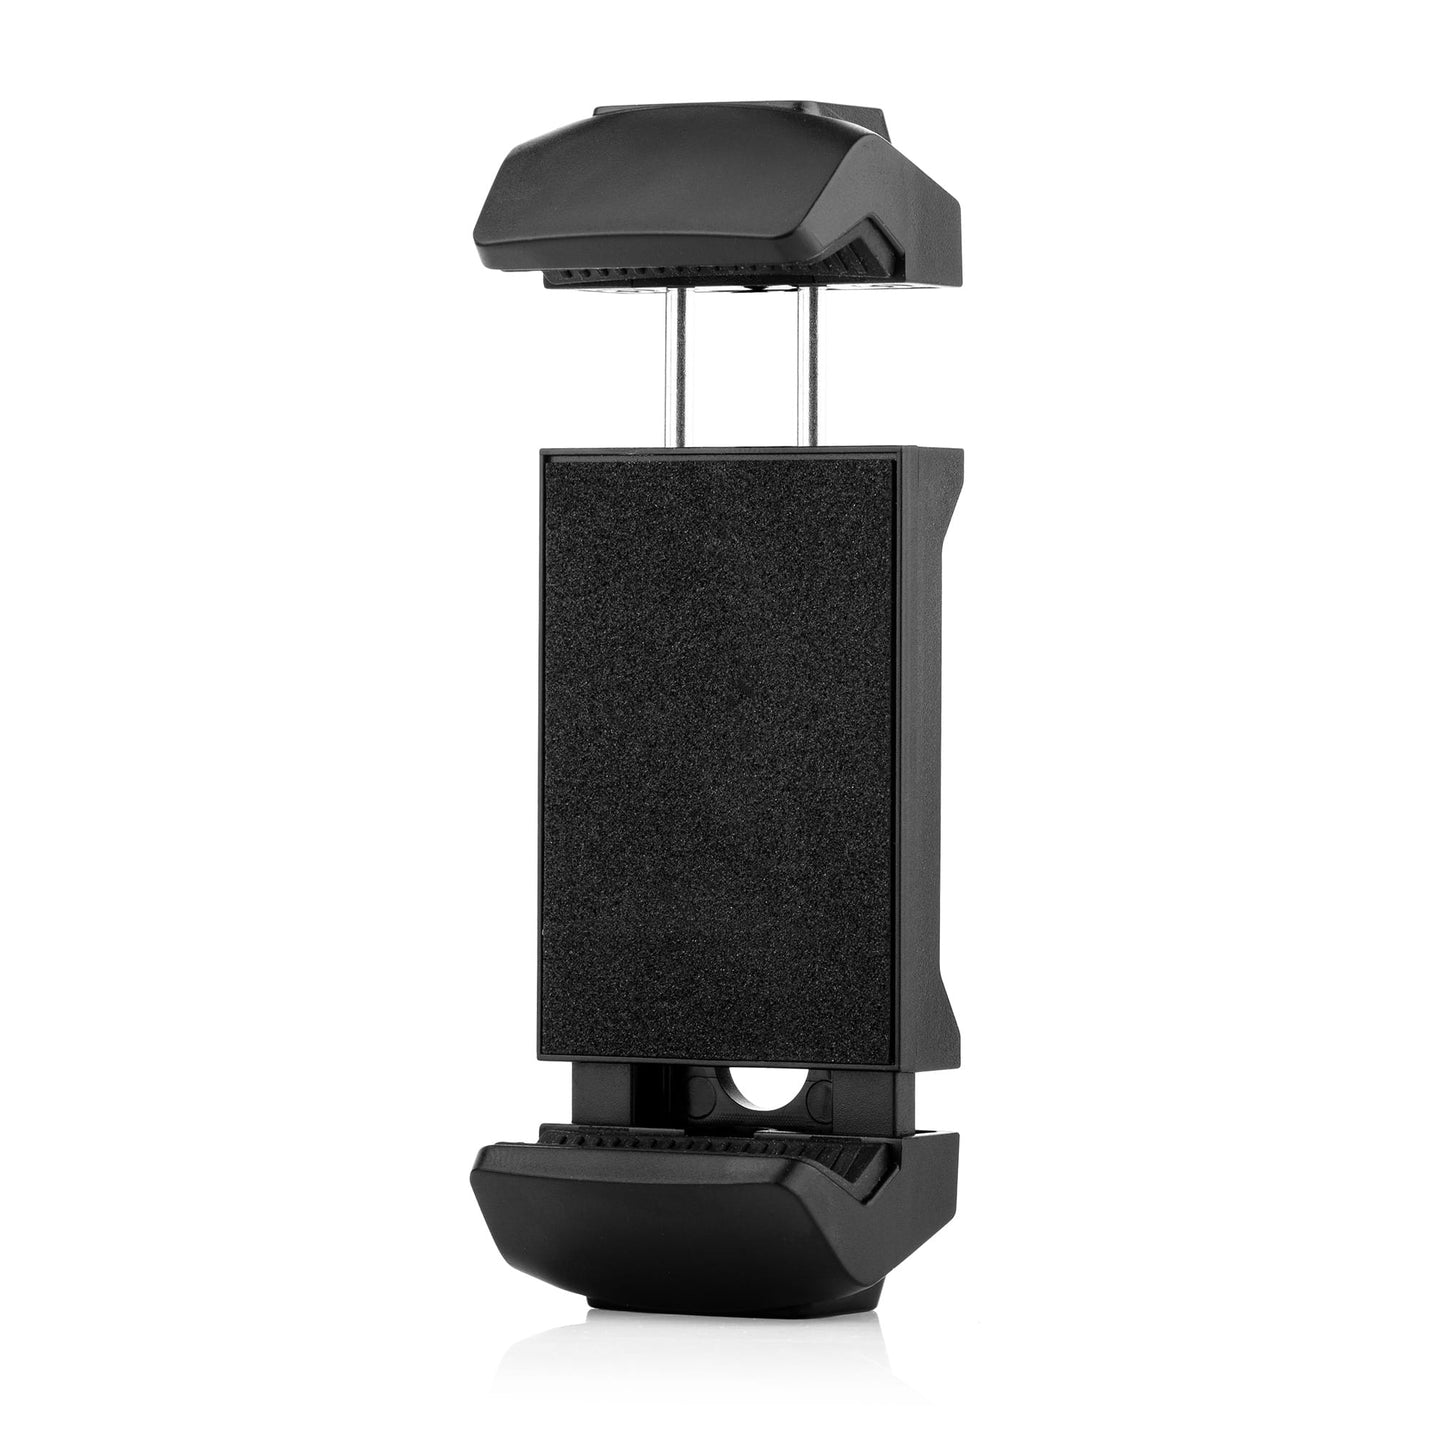 MOJOGEAR Phone & Tablet Holder for Tripod - With Cold Shoe Mount